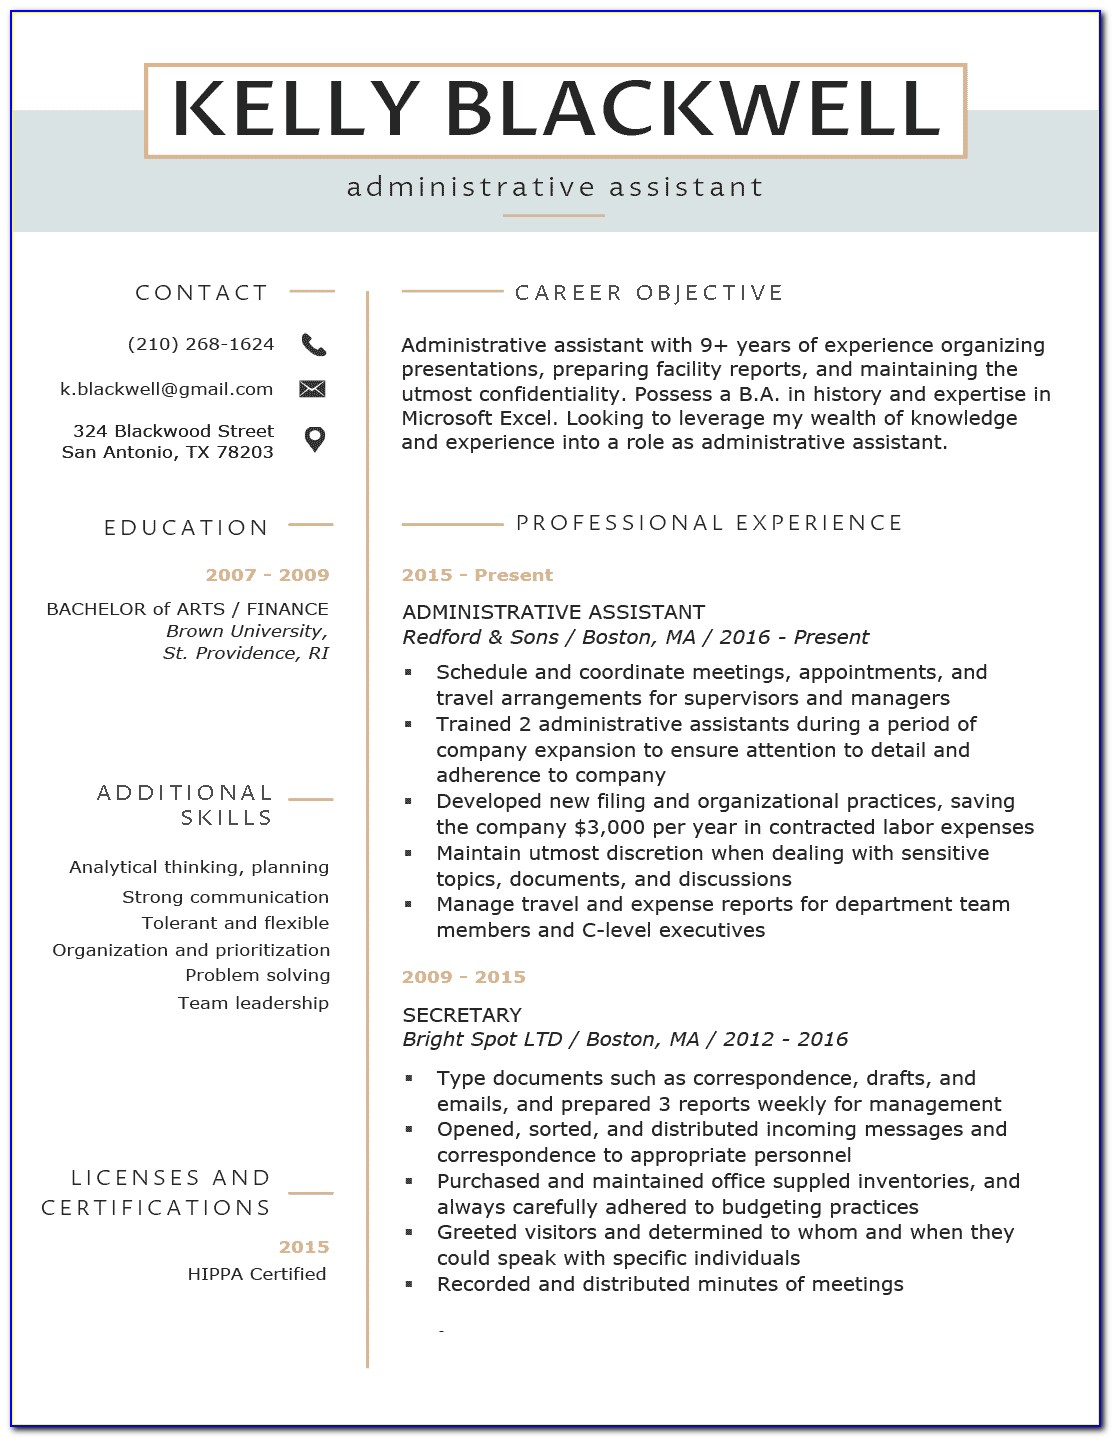 Resume Builder For Experienced Professionals